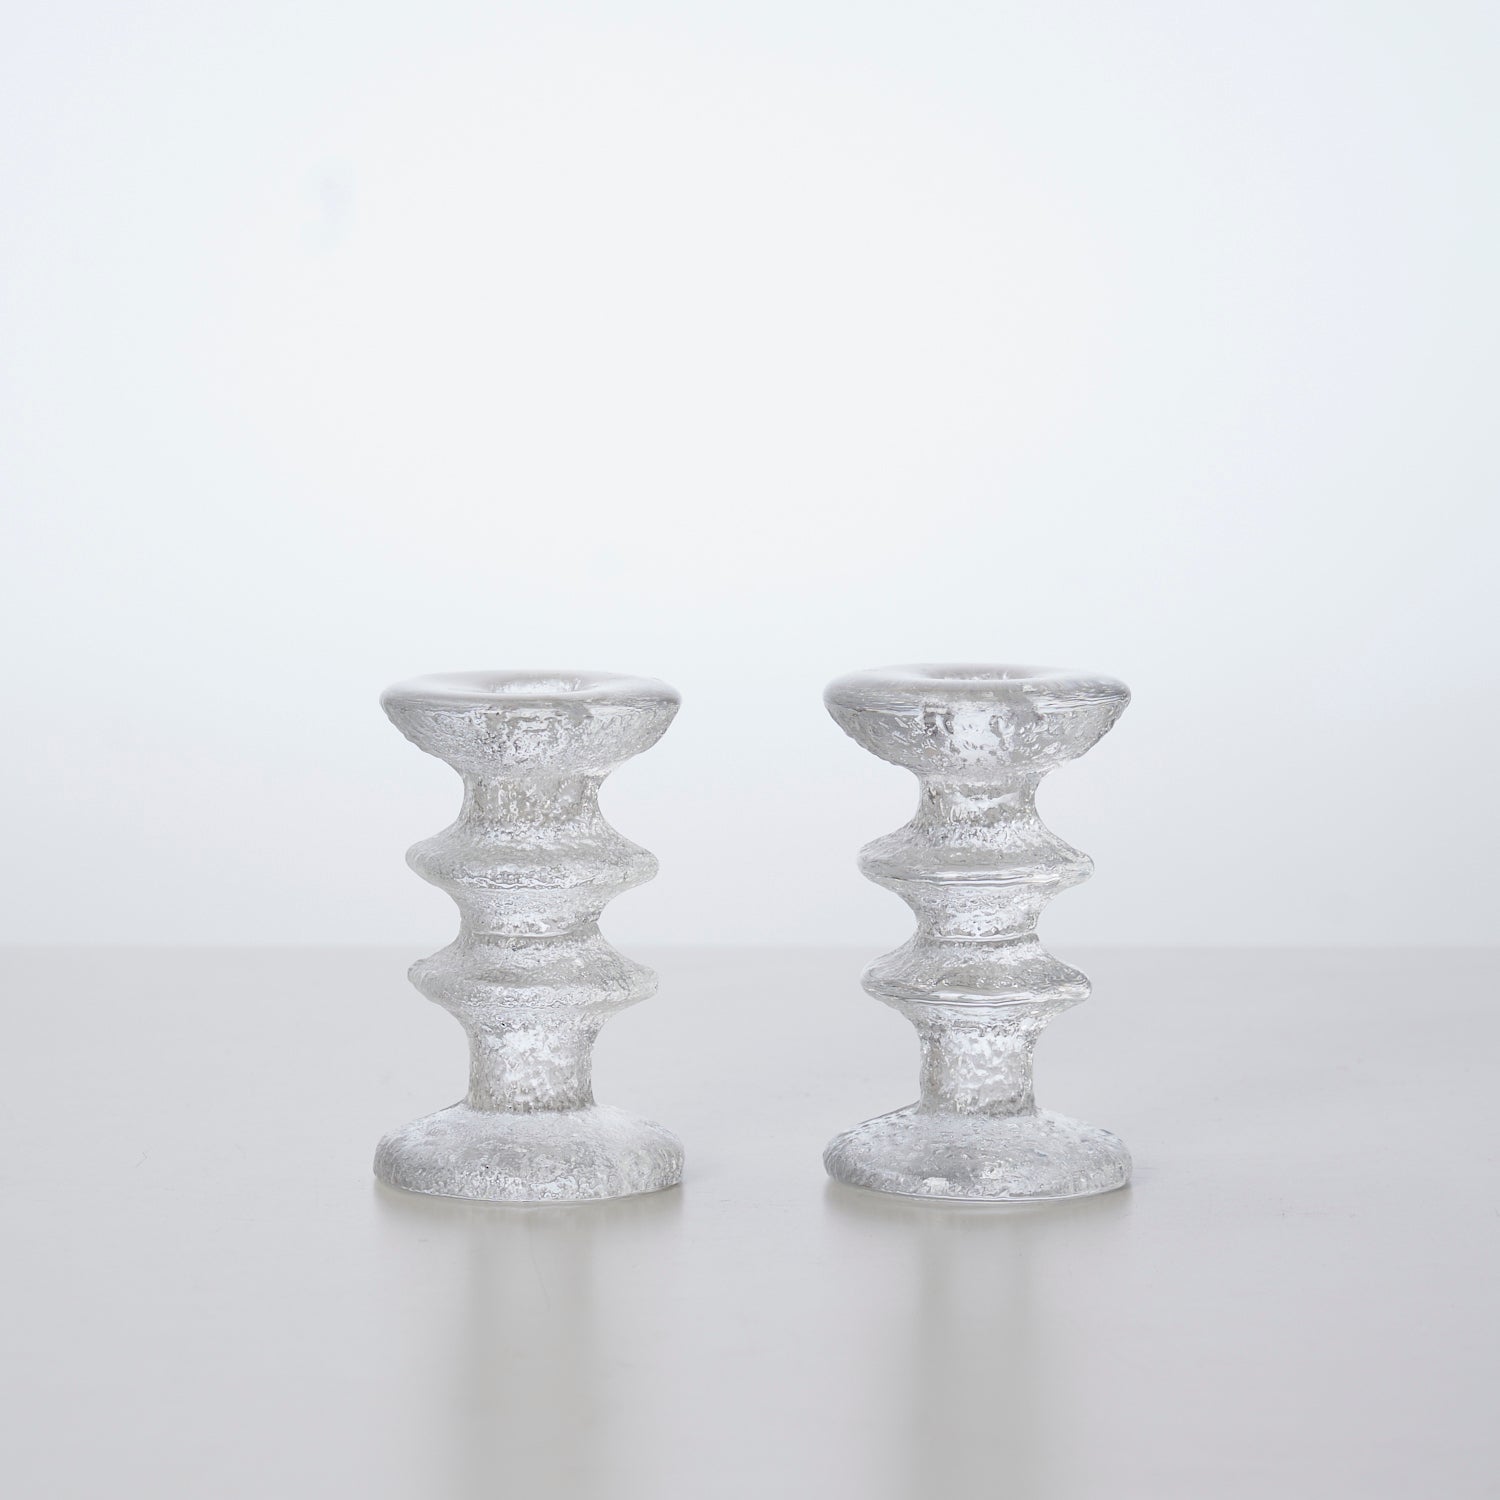 Pair of 'Festivo' Candle Holders by Timo Sarpeneva for Iittala, Finland